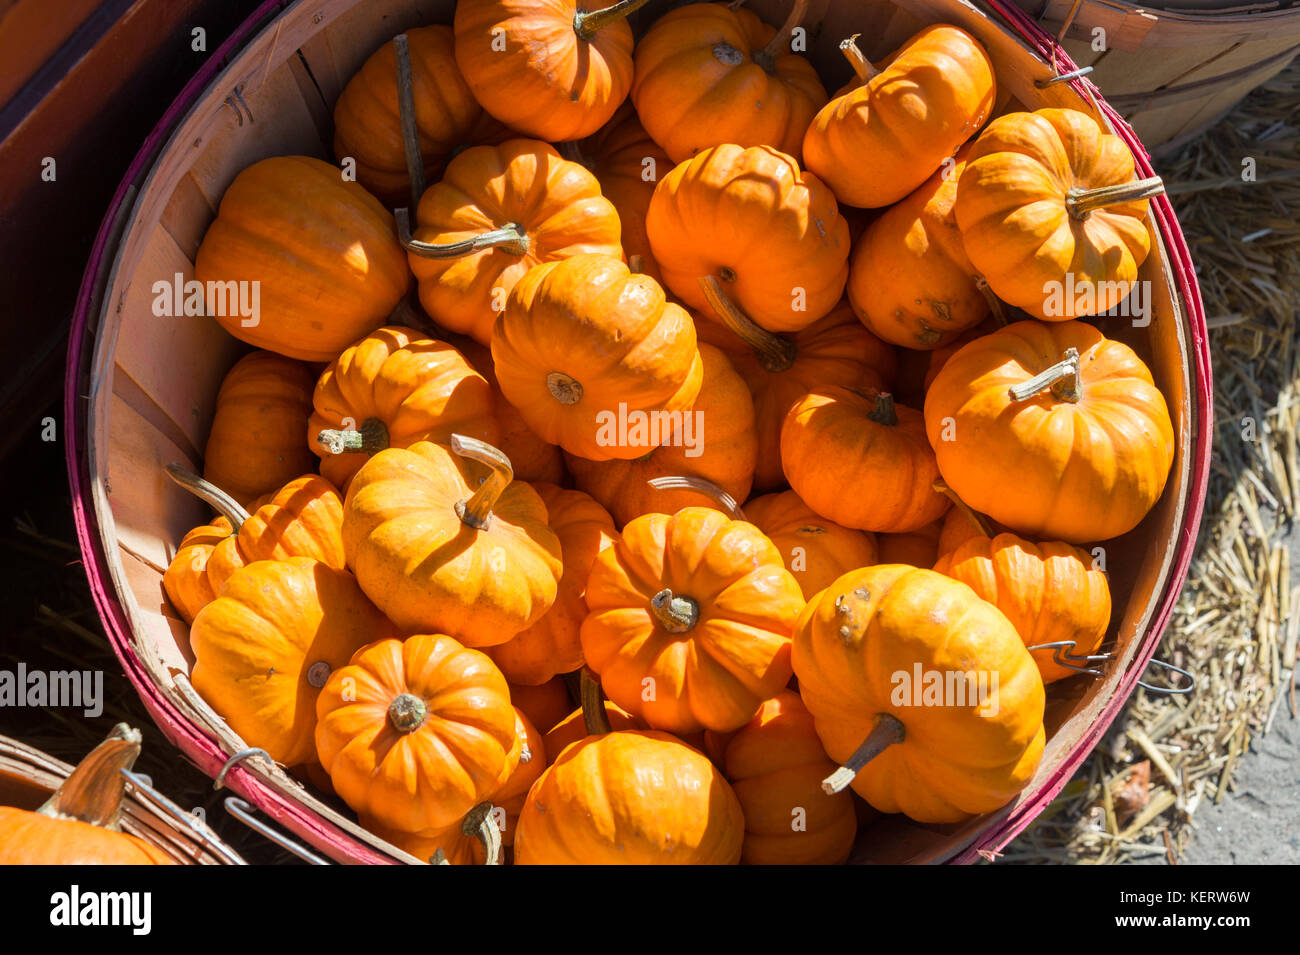 Small Halloween pumpkins for sale in Montreal, Canada Stock Photo